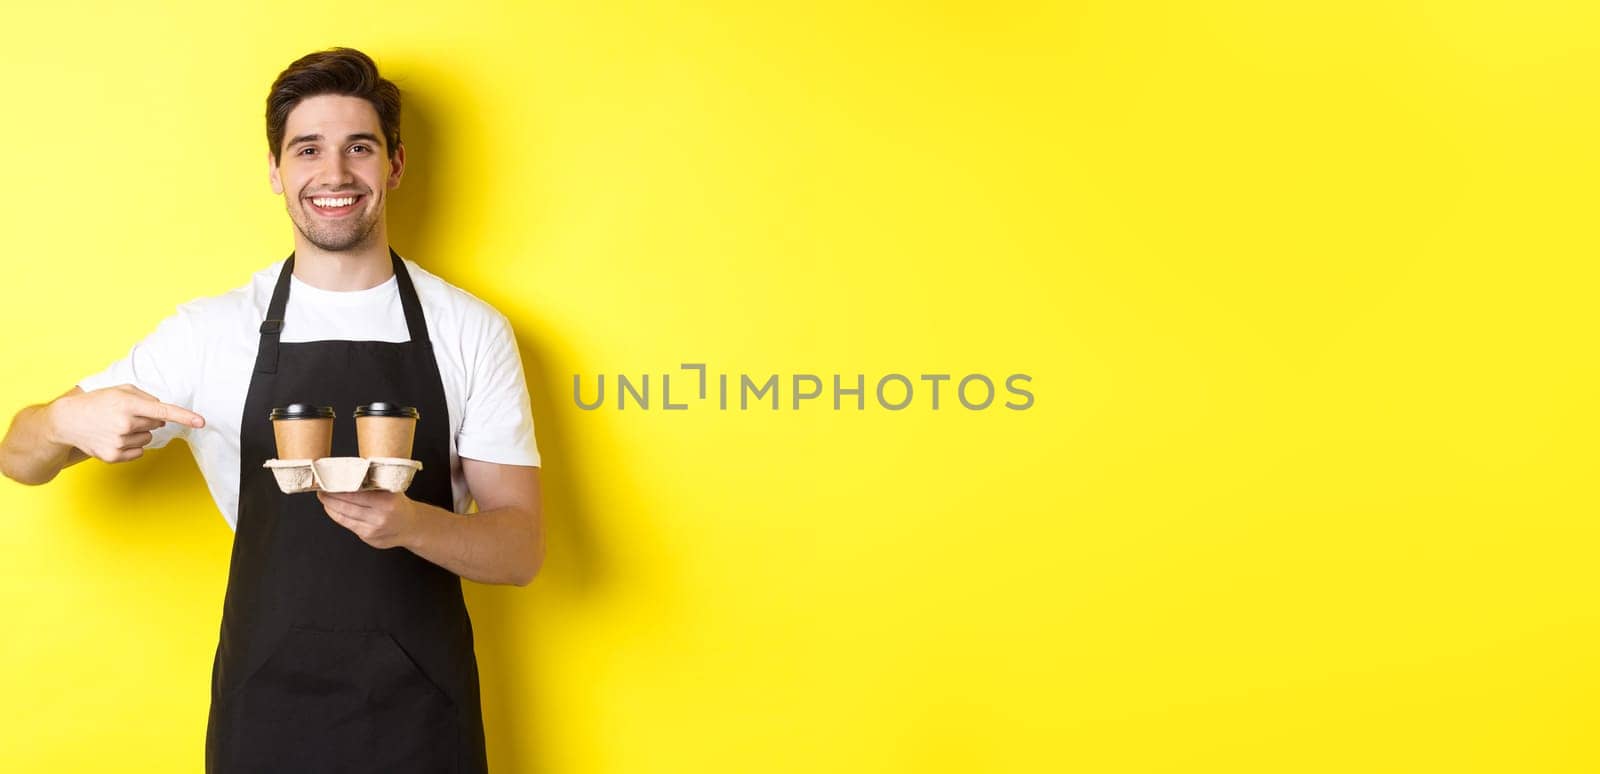 Handsome barista holding two cups of takeaway coffee, pointing finger at drinks and smiling, standing in black apron against yellow background.